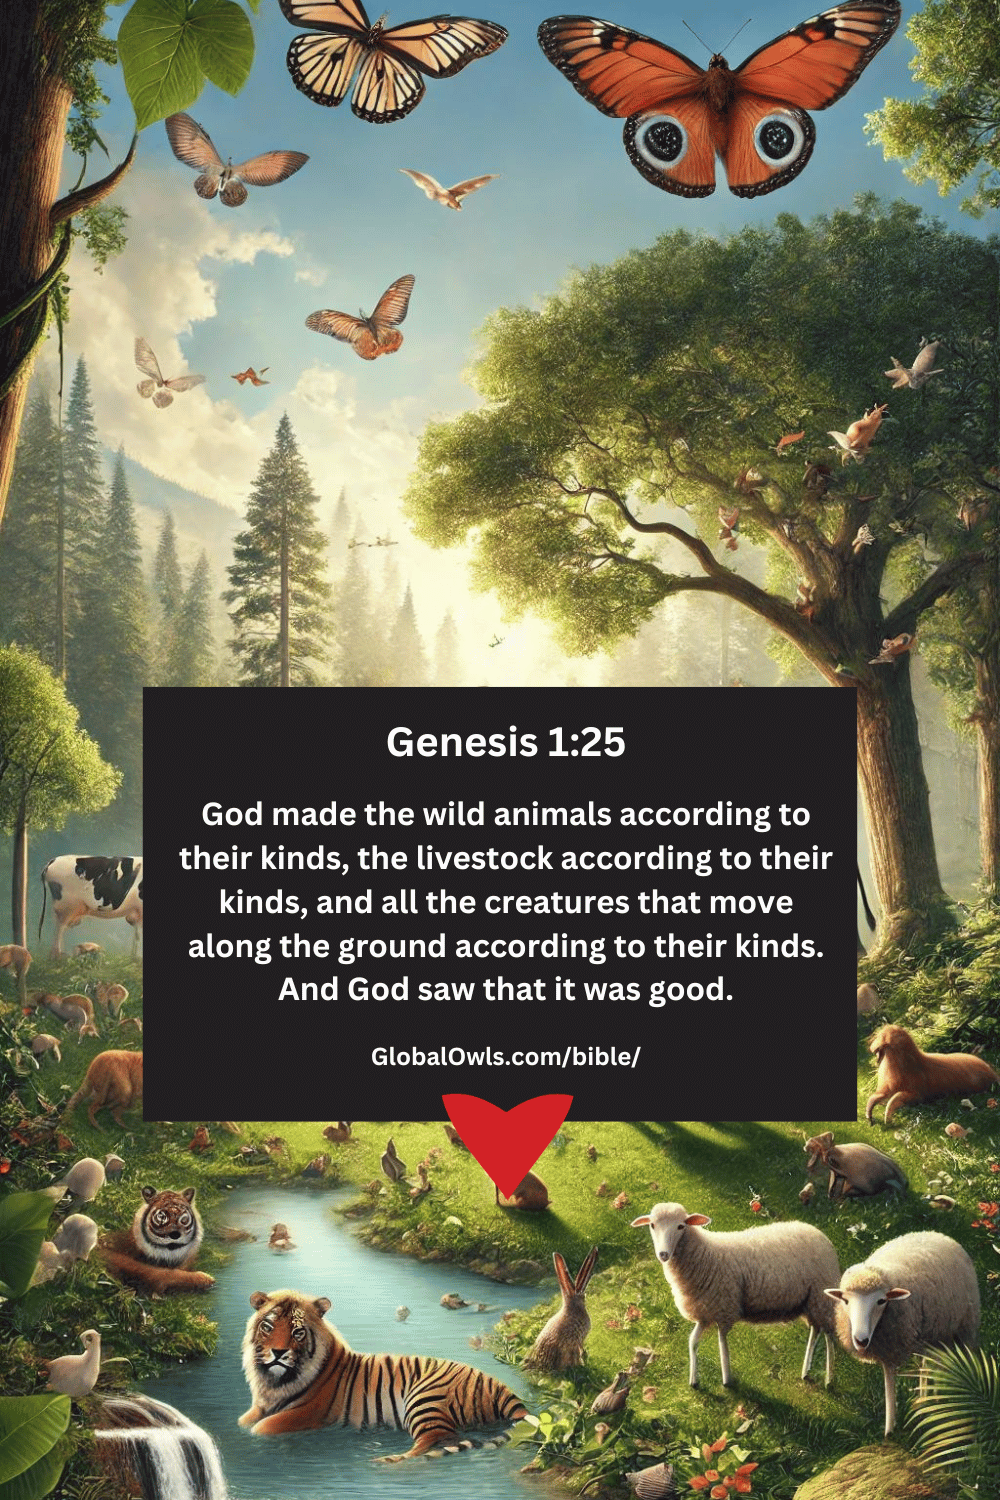 Genesis 1-25 God made the wild animals according to their kinds, the livestock according to their kinds, and all the creatures that move along the ground according to their kinds. And God saw that